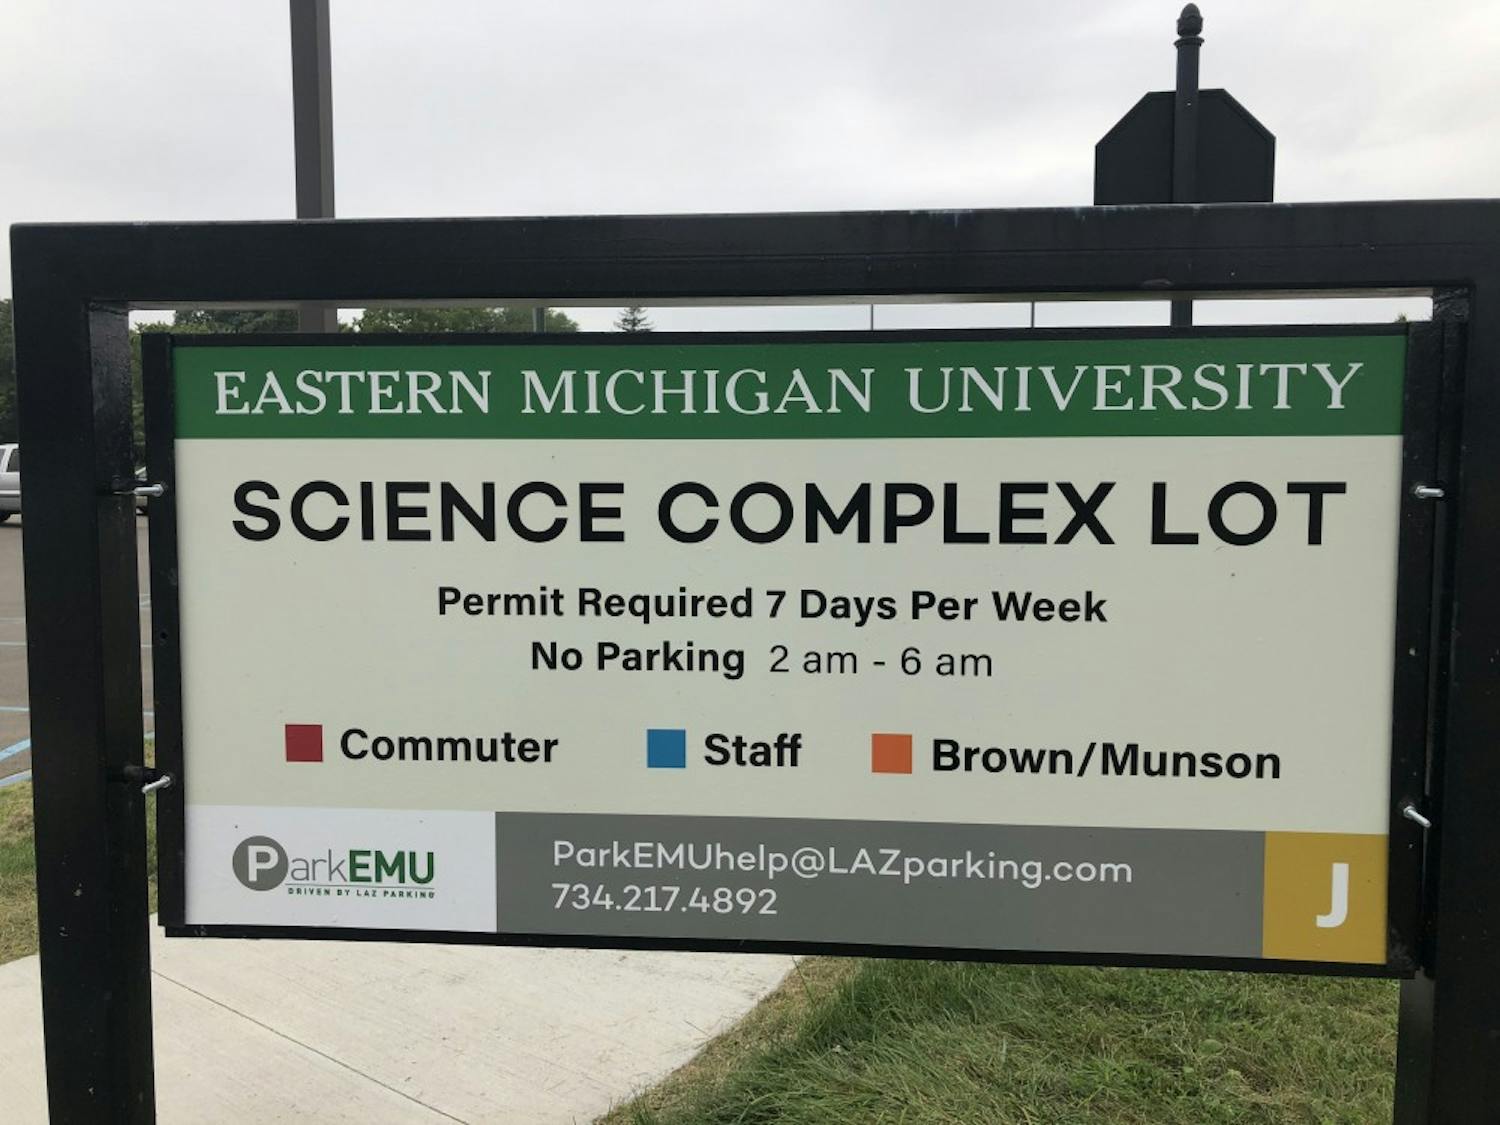 New Science Complex lot sign